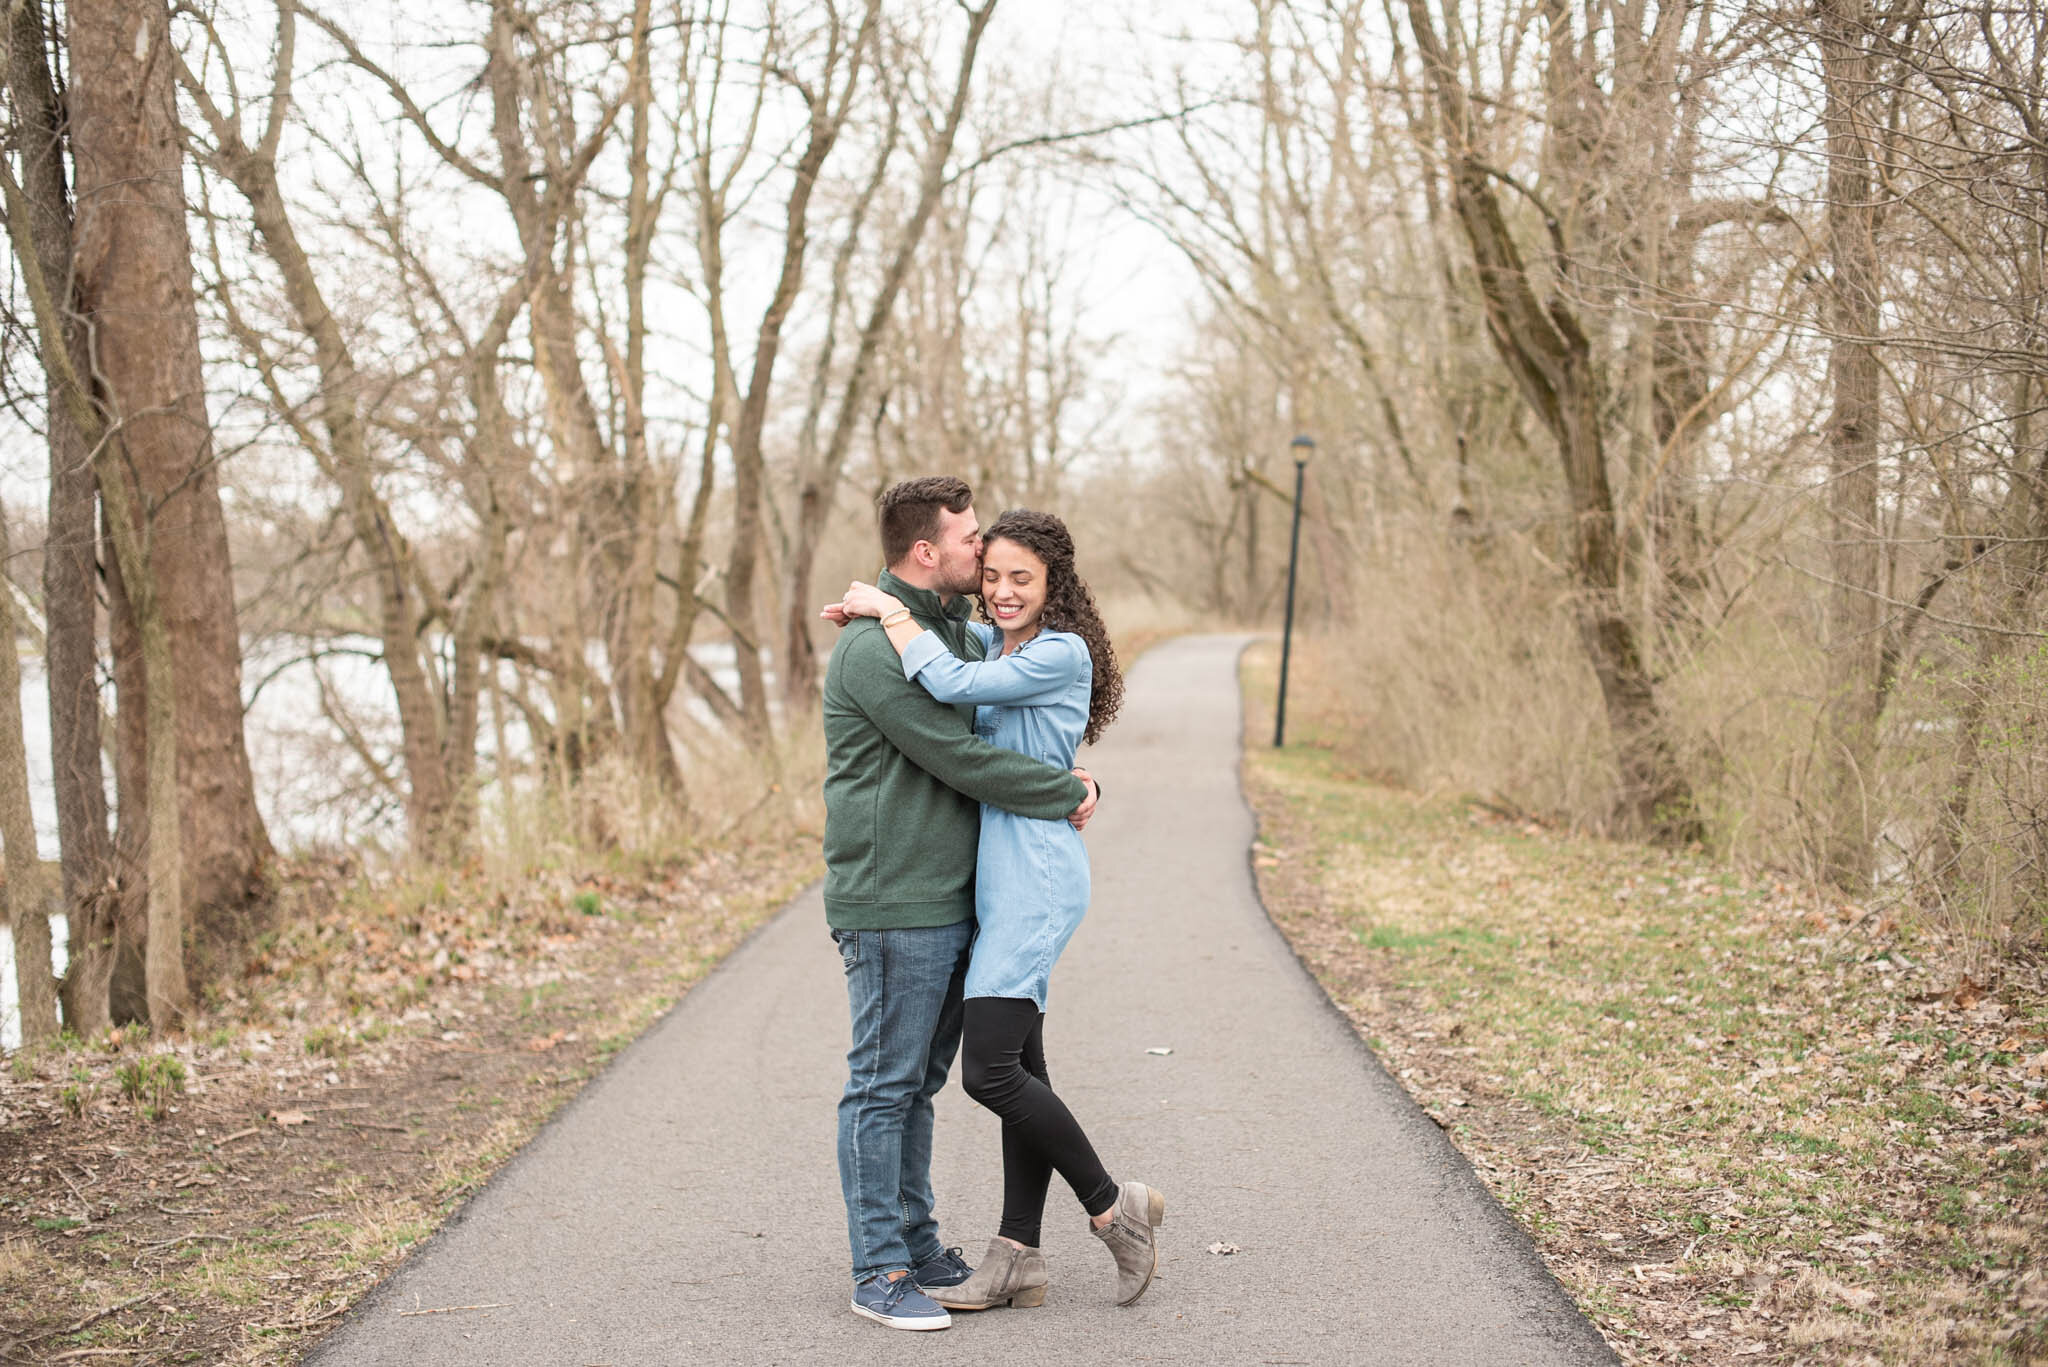 Shadyside Park Engagement Photos in Anderson, Indiana-1001.jpg